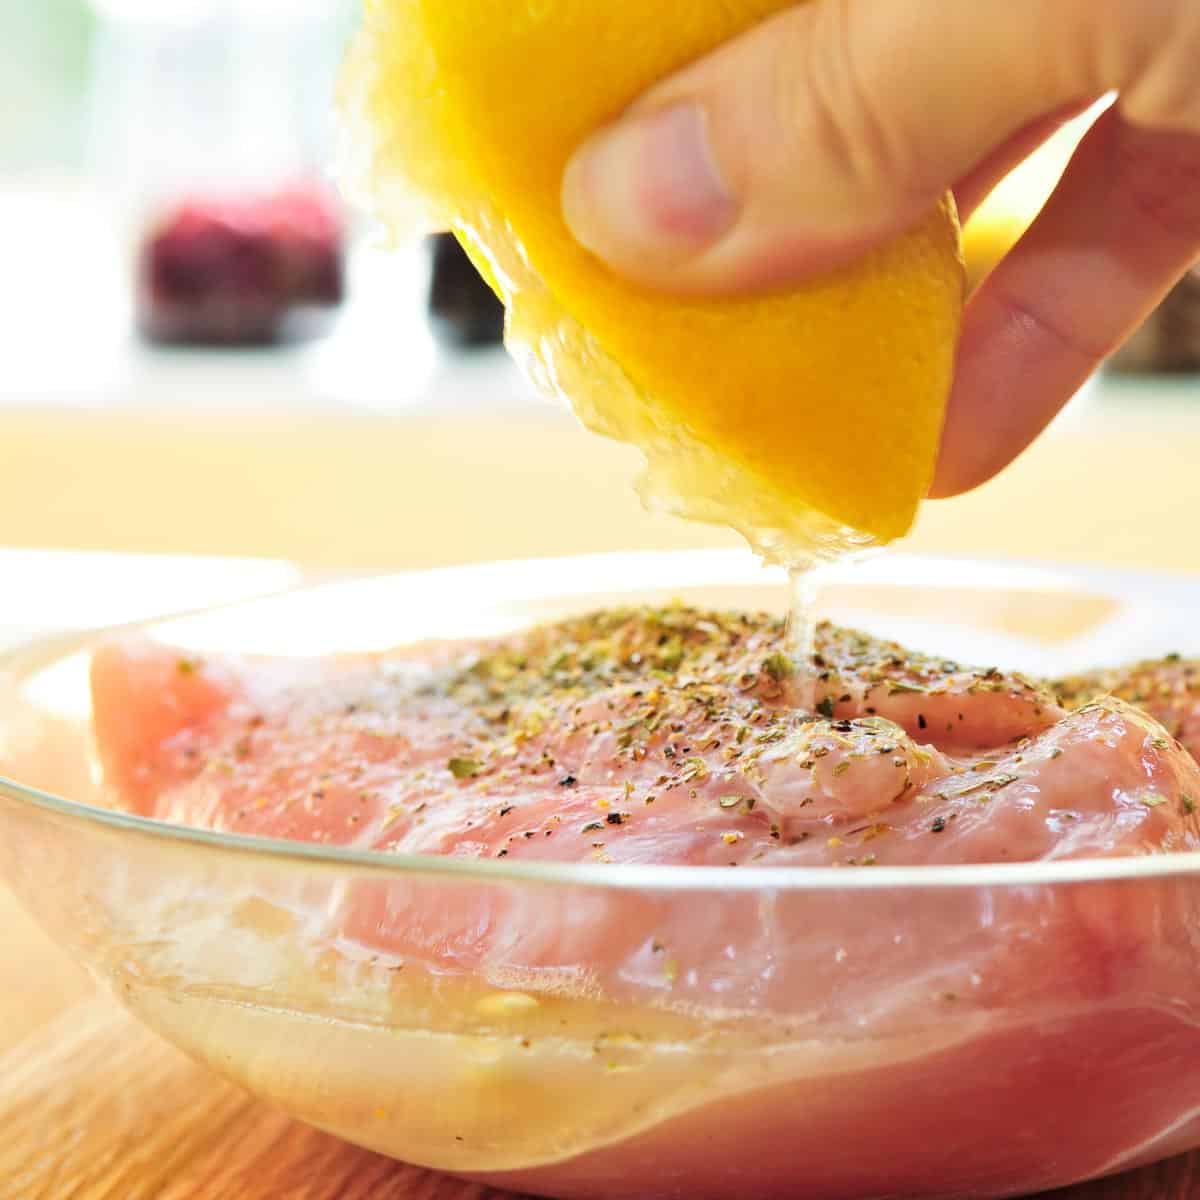 Lemon is squeezed over seasoned chicken in a glass dish.